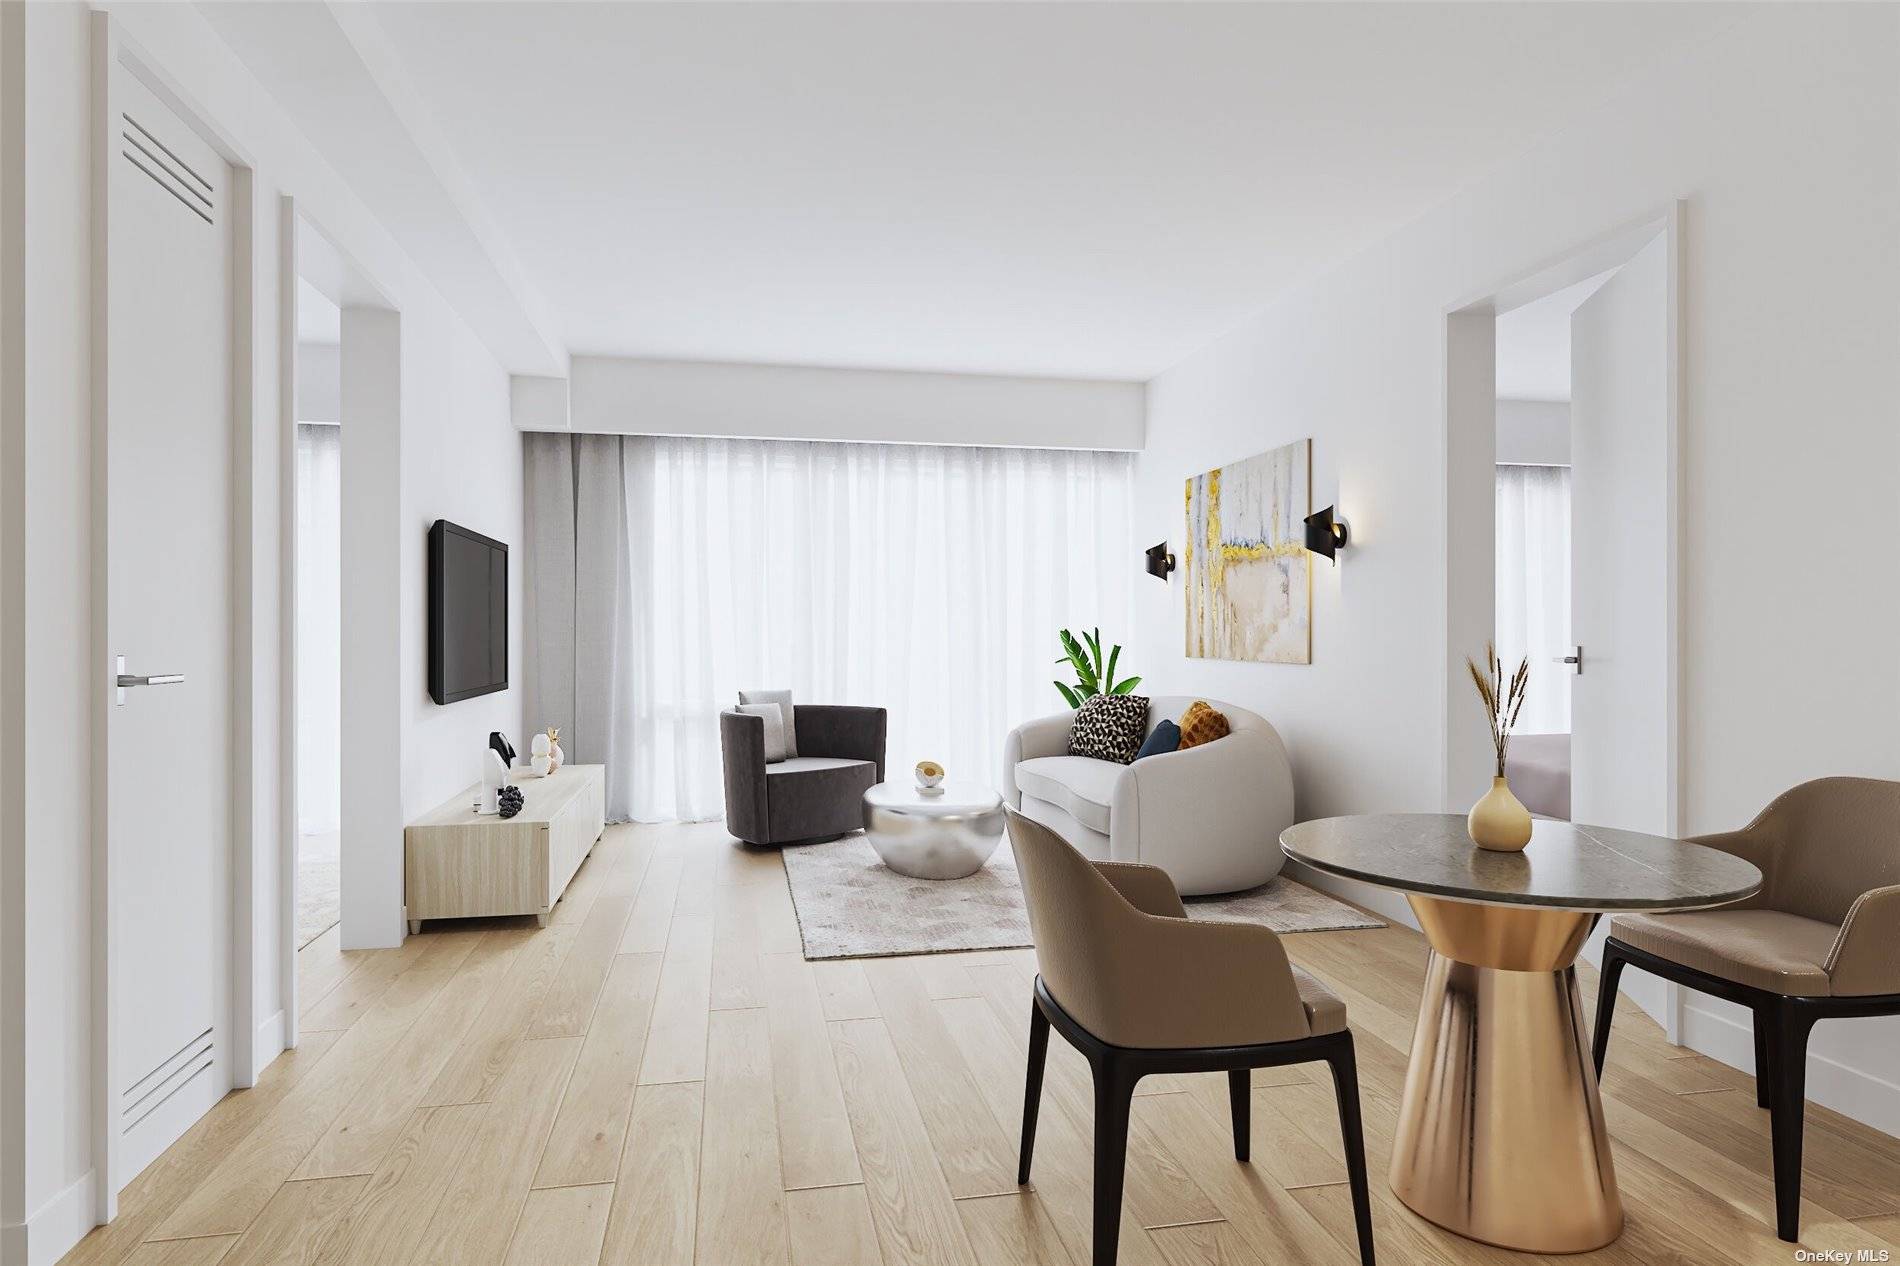 Welcome to the newest high rise luxury condo in the heart of Flushing, the Prince !